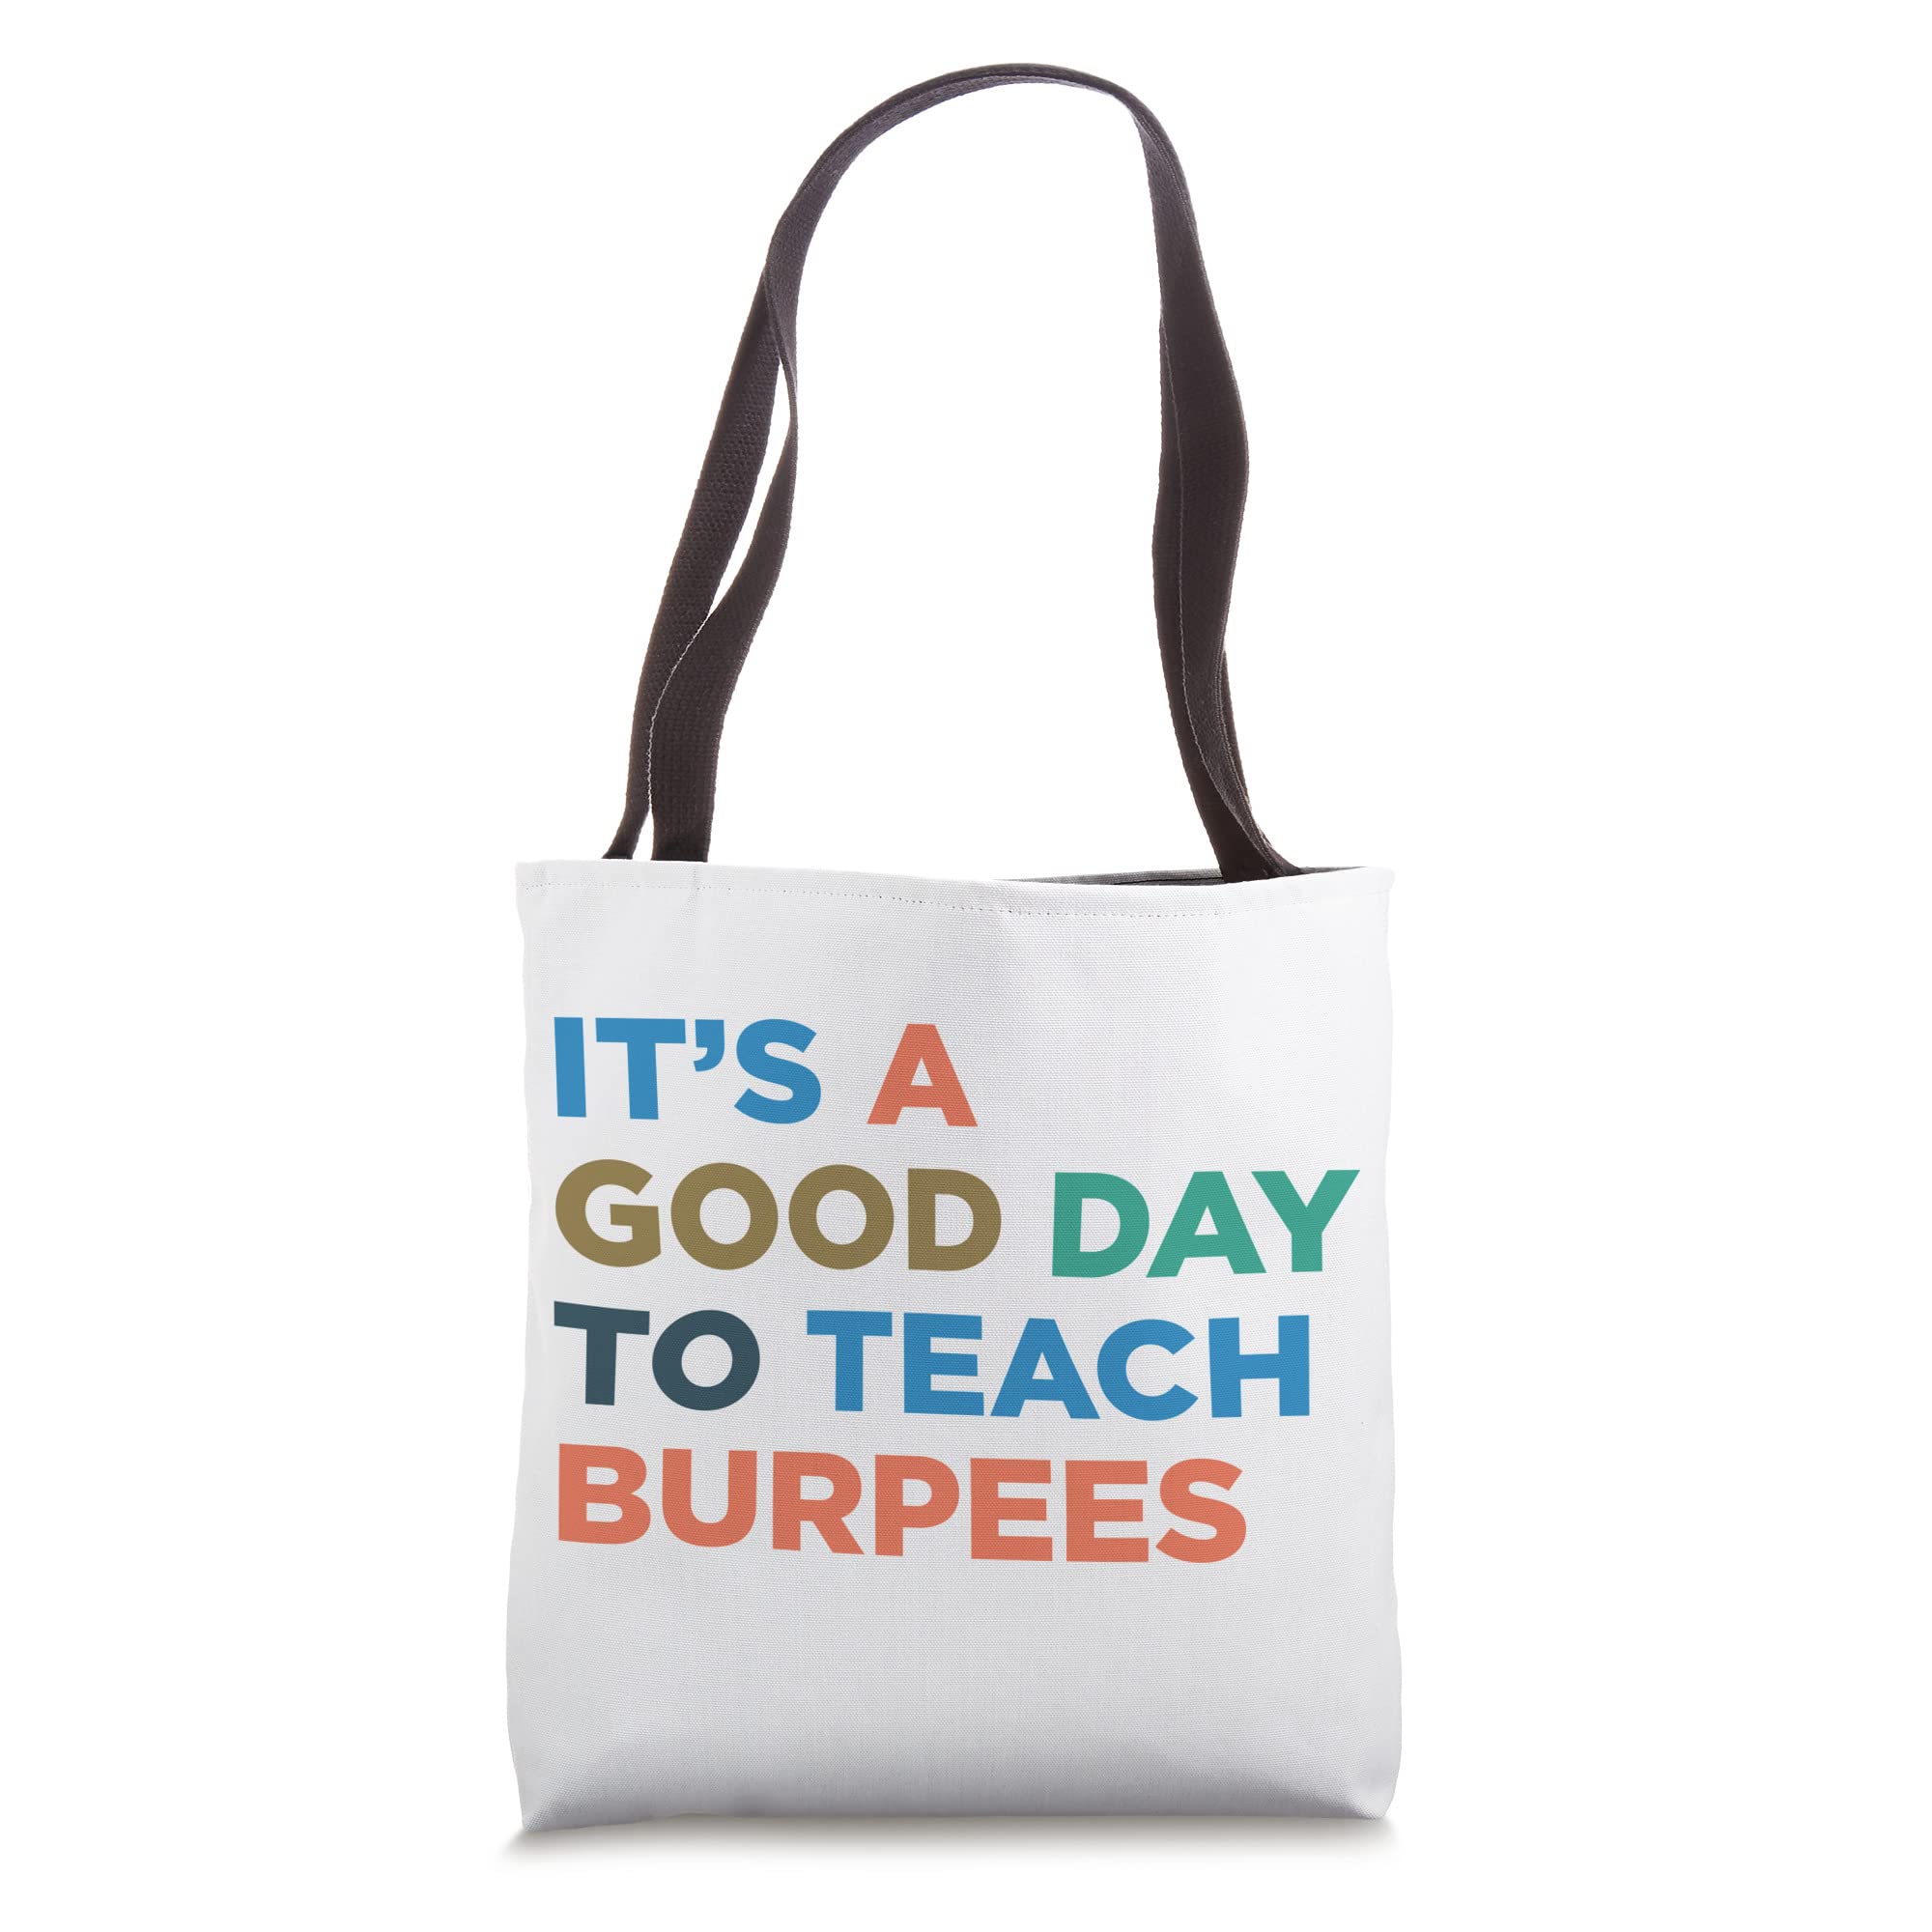 It's A Good Day To Teach - Gym Workout Coach Burpees Tote Bag